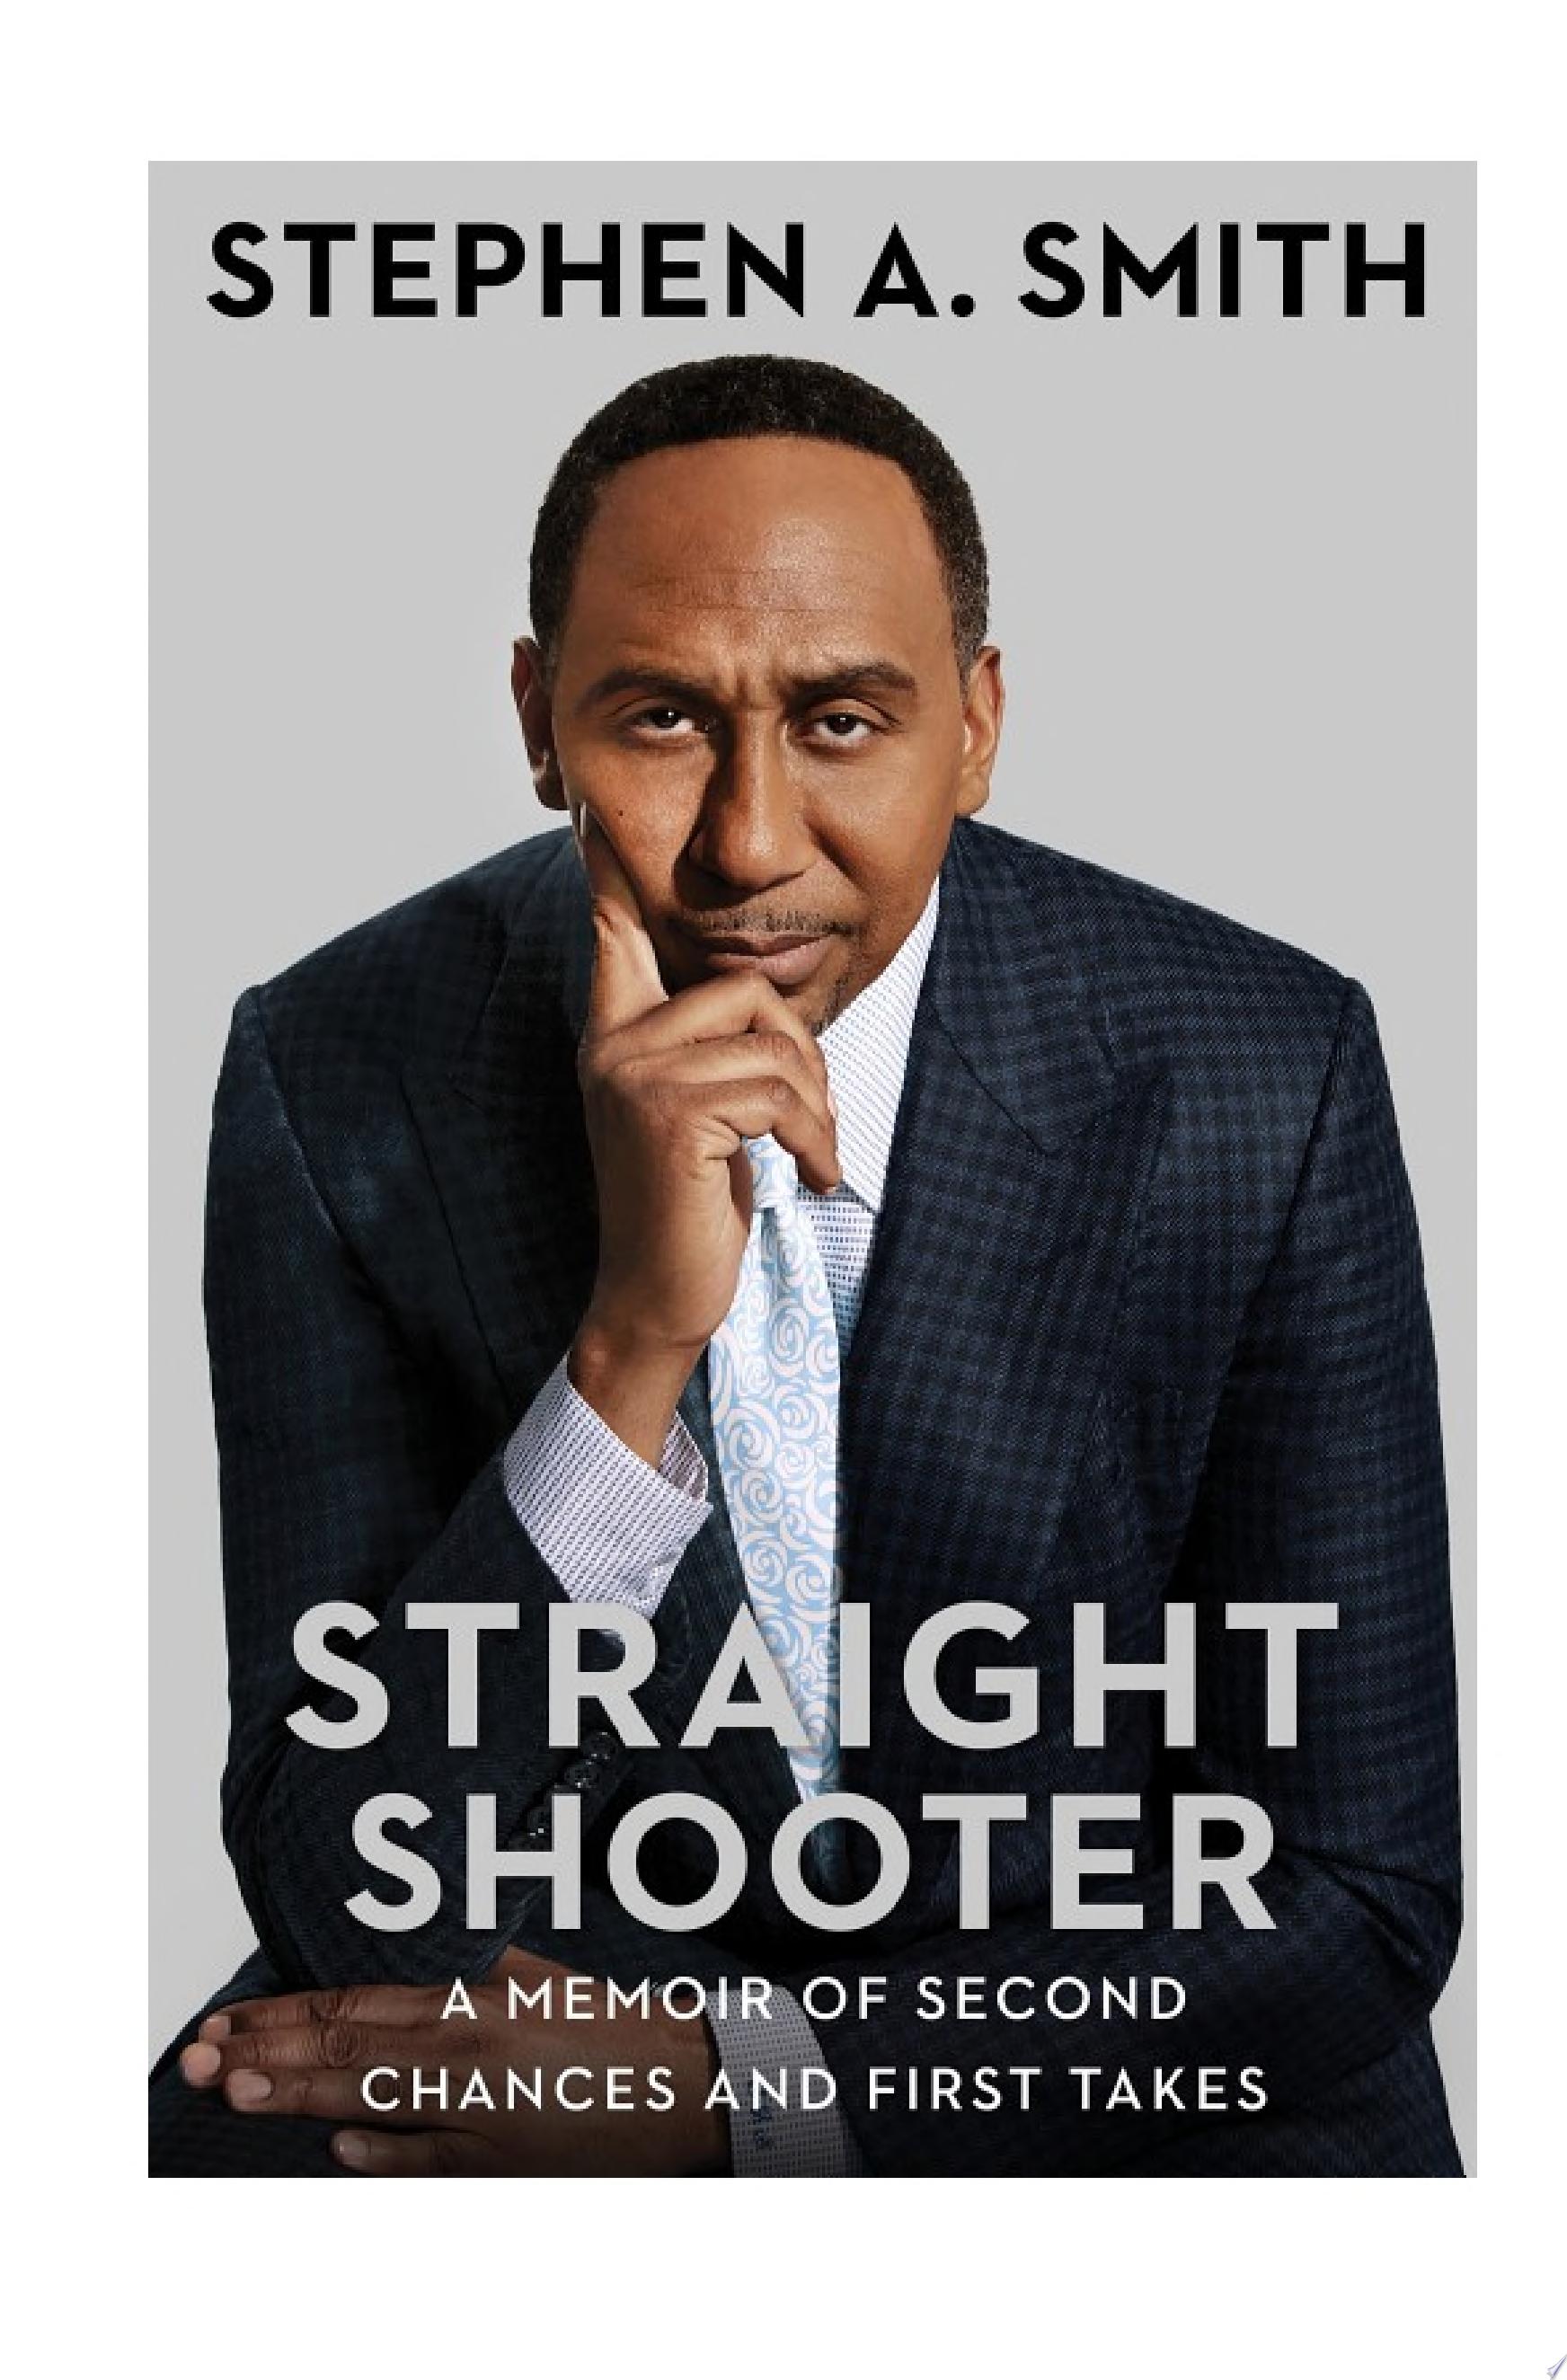 Image for "Straight Shooter"